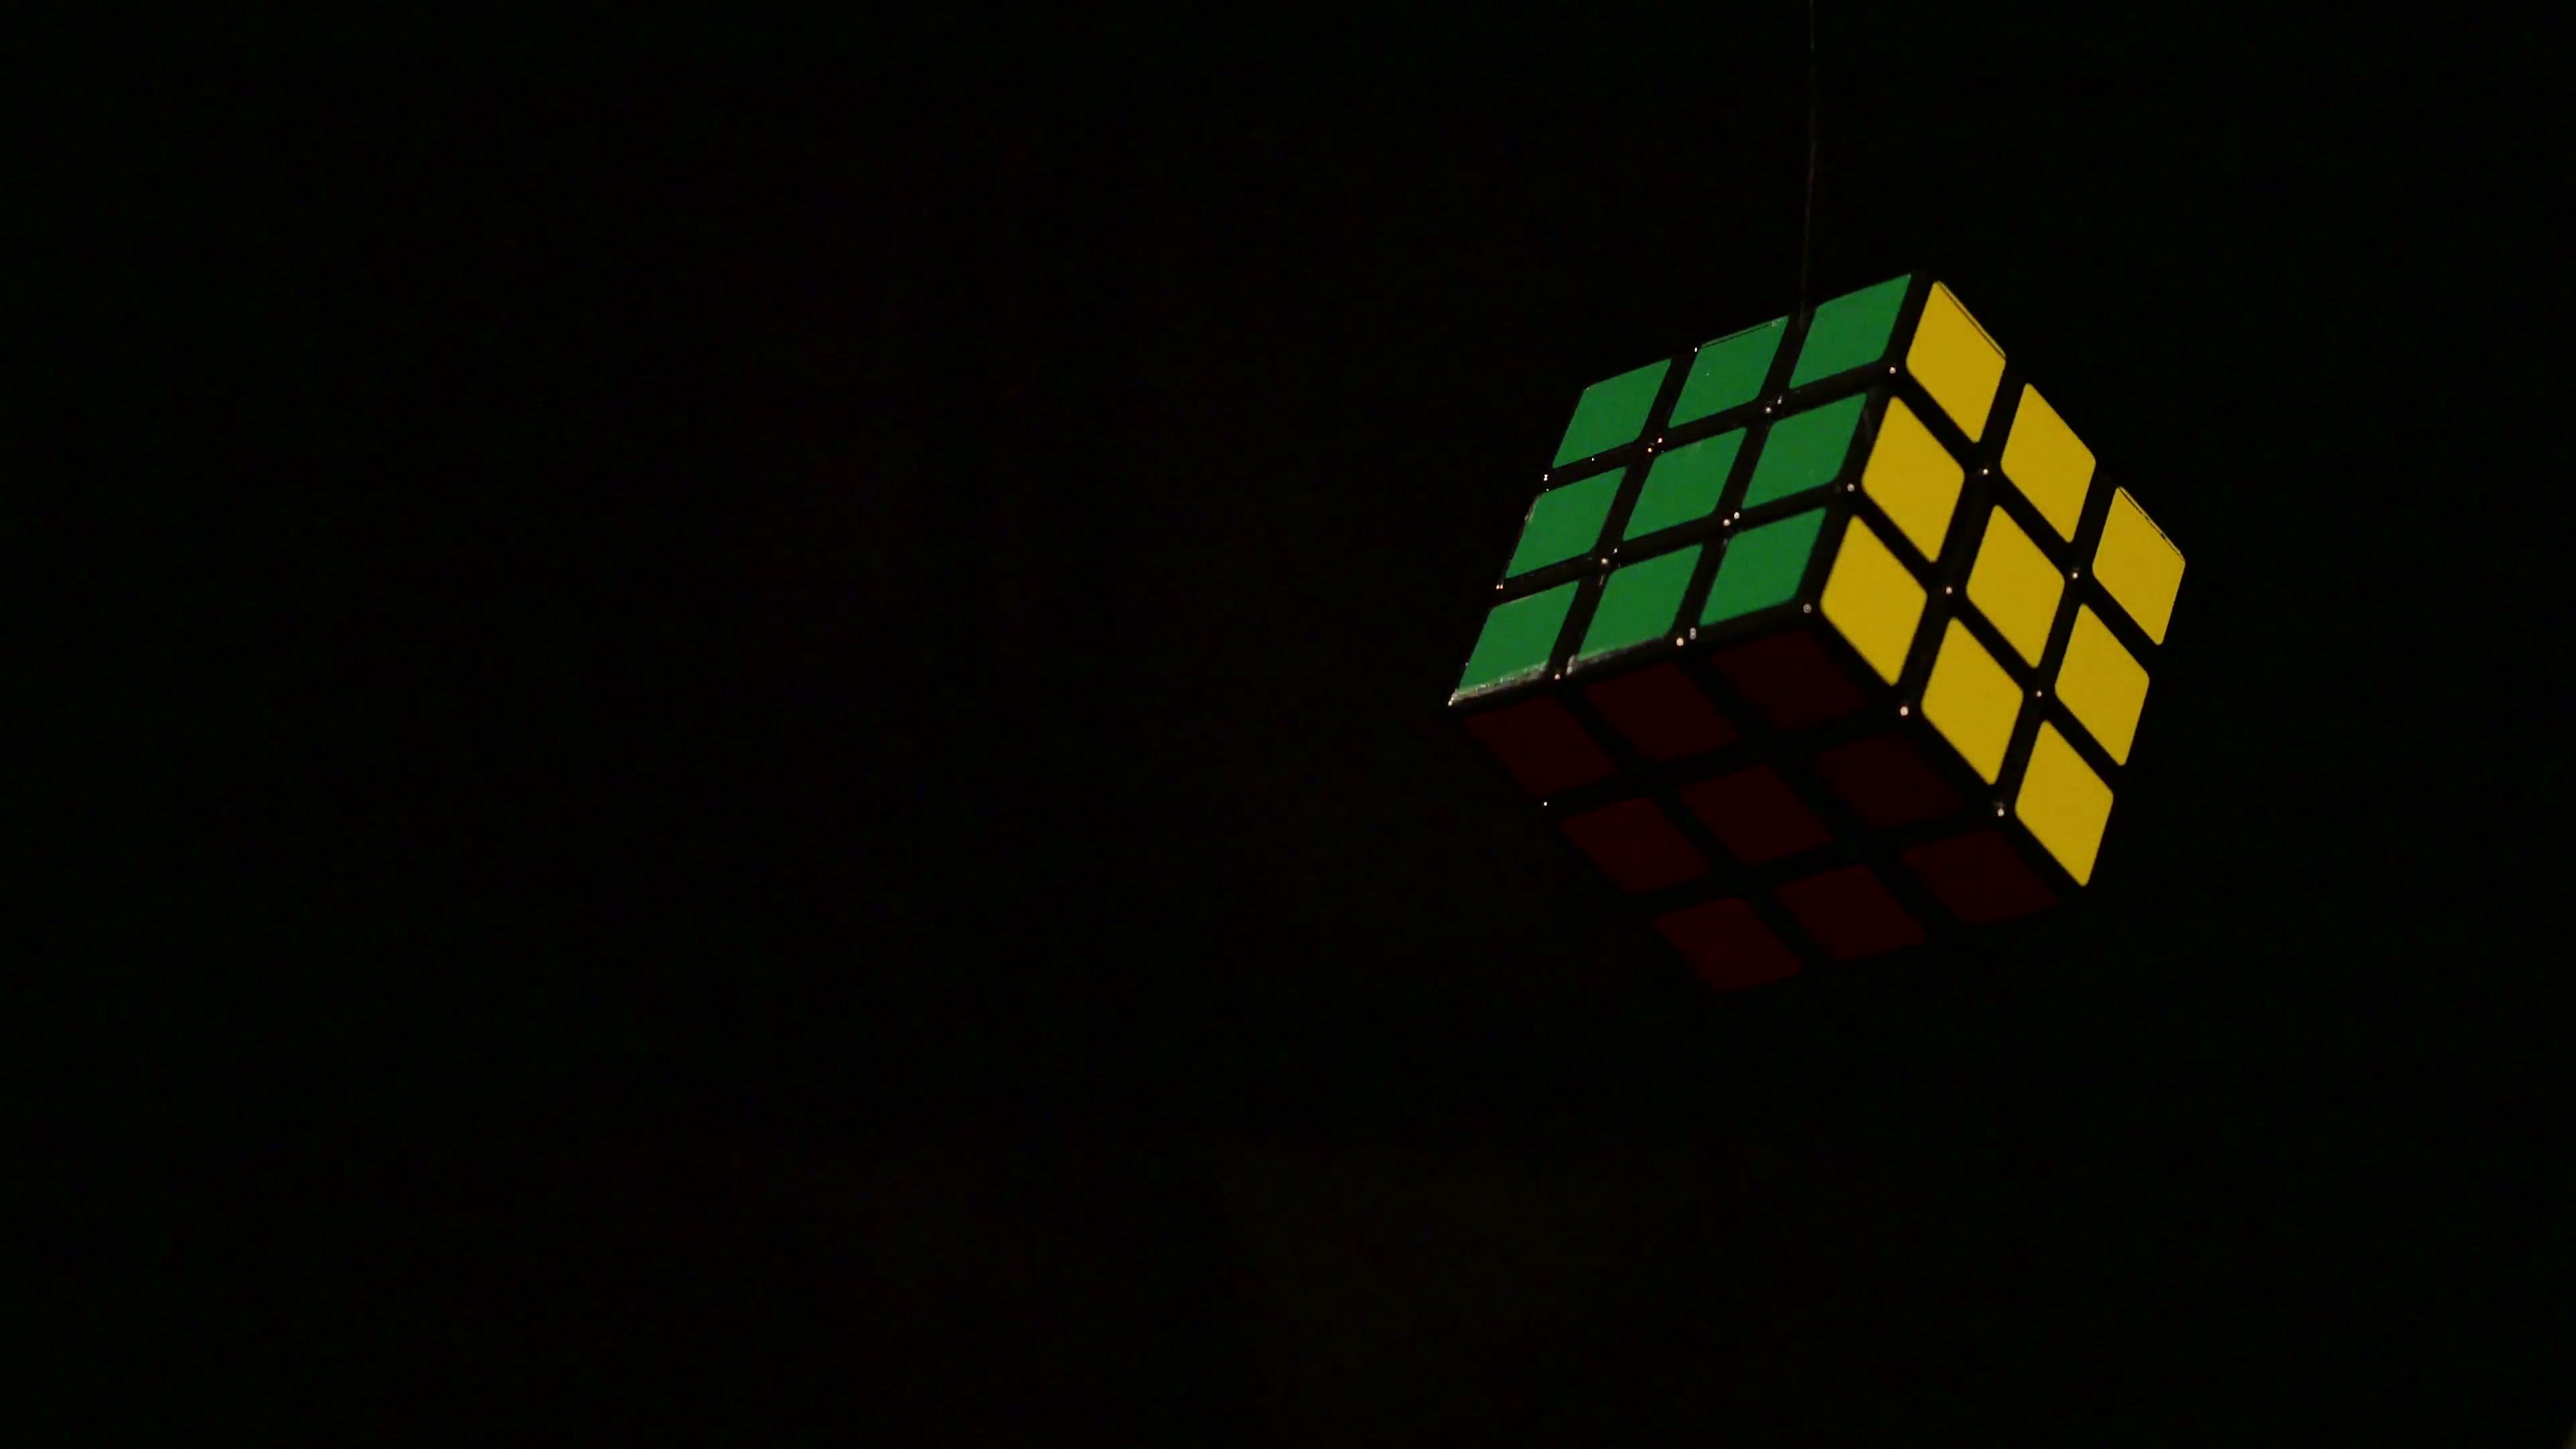 A Rubik S Cube Being Rotated Over Black Background Stock